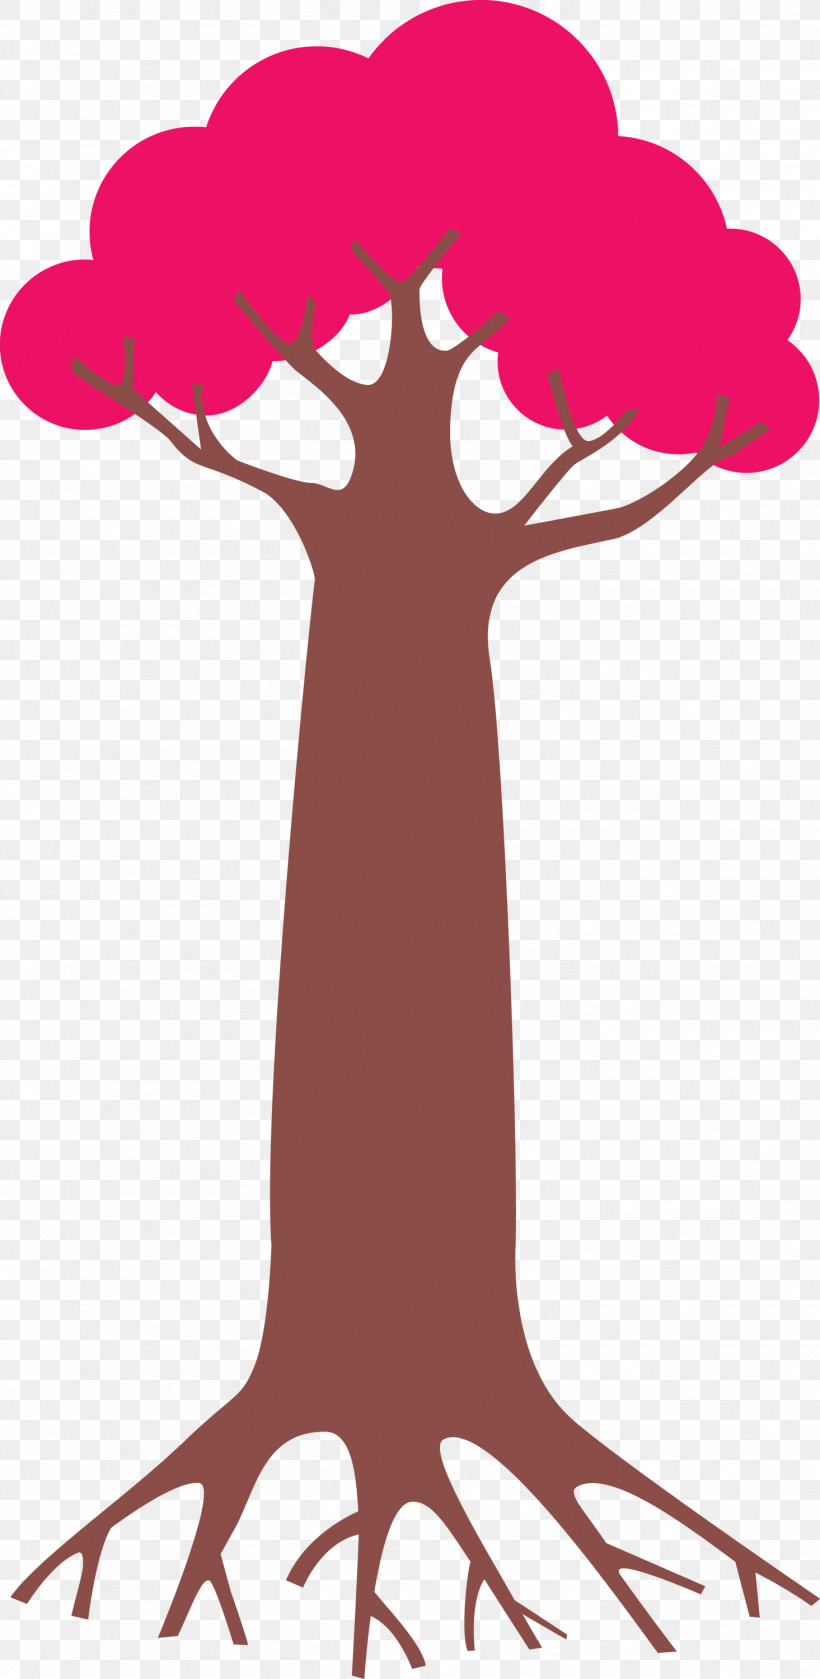 Joint Character Pink M Silhouette Beak, PNG, 1465x3000px, Cartoon Tree, Abstract Tree, Beak, Biology, Character Download Free